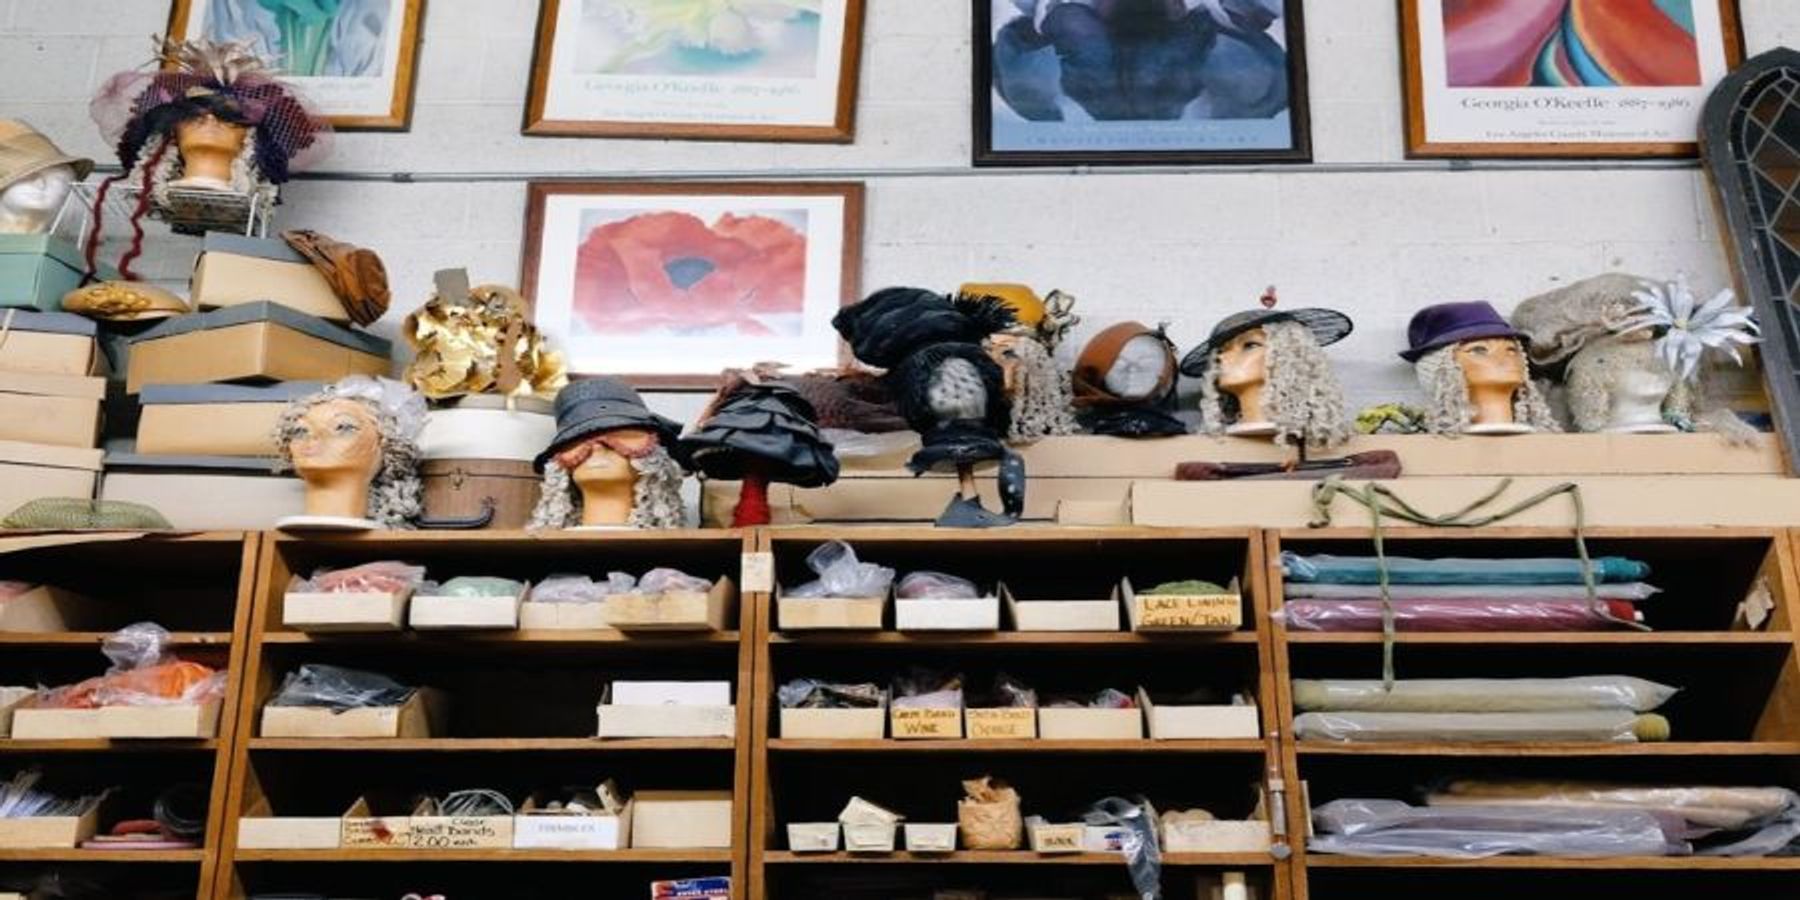 After 81 Years Selling Hat Supplies, Unique DTLA Shop May Close